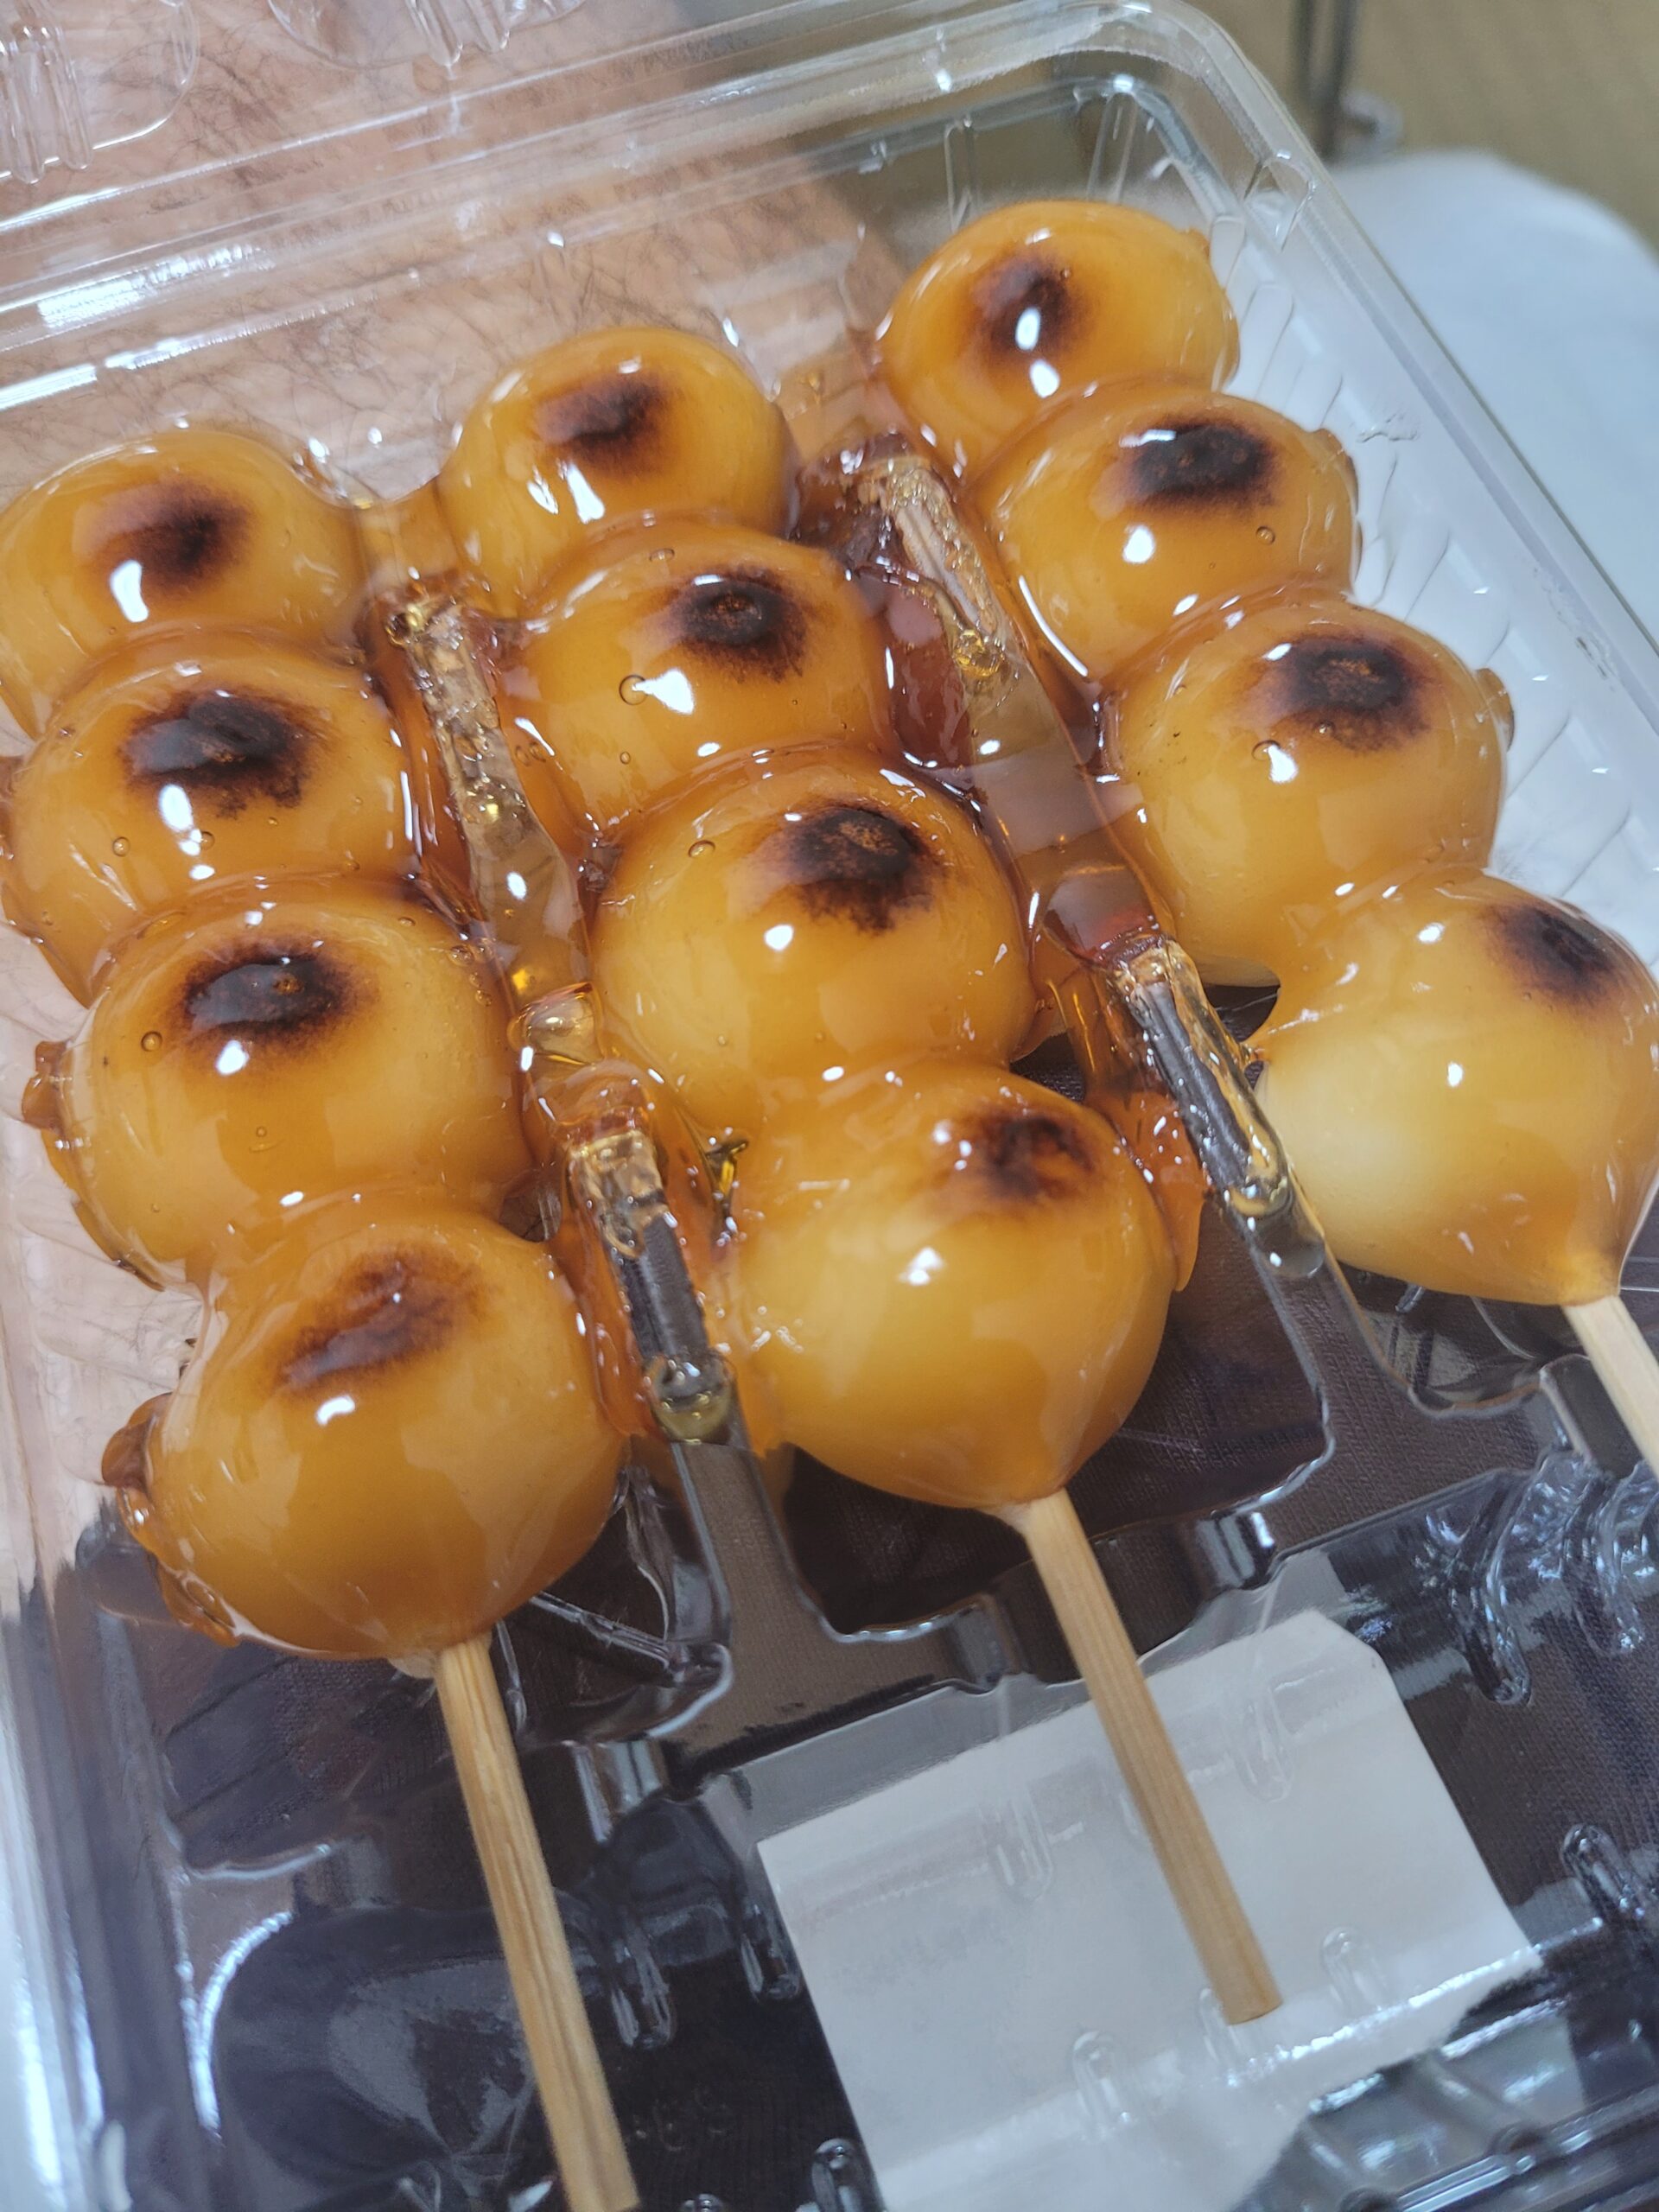 5 Japanese desserts you’ll find at any convenience store